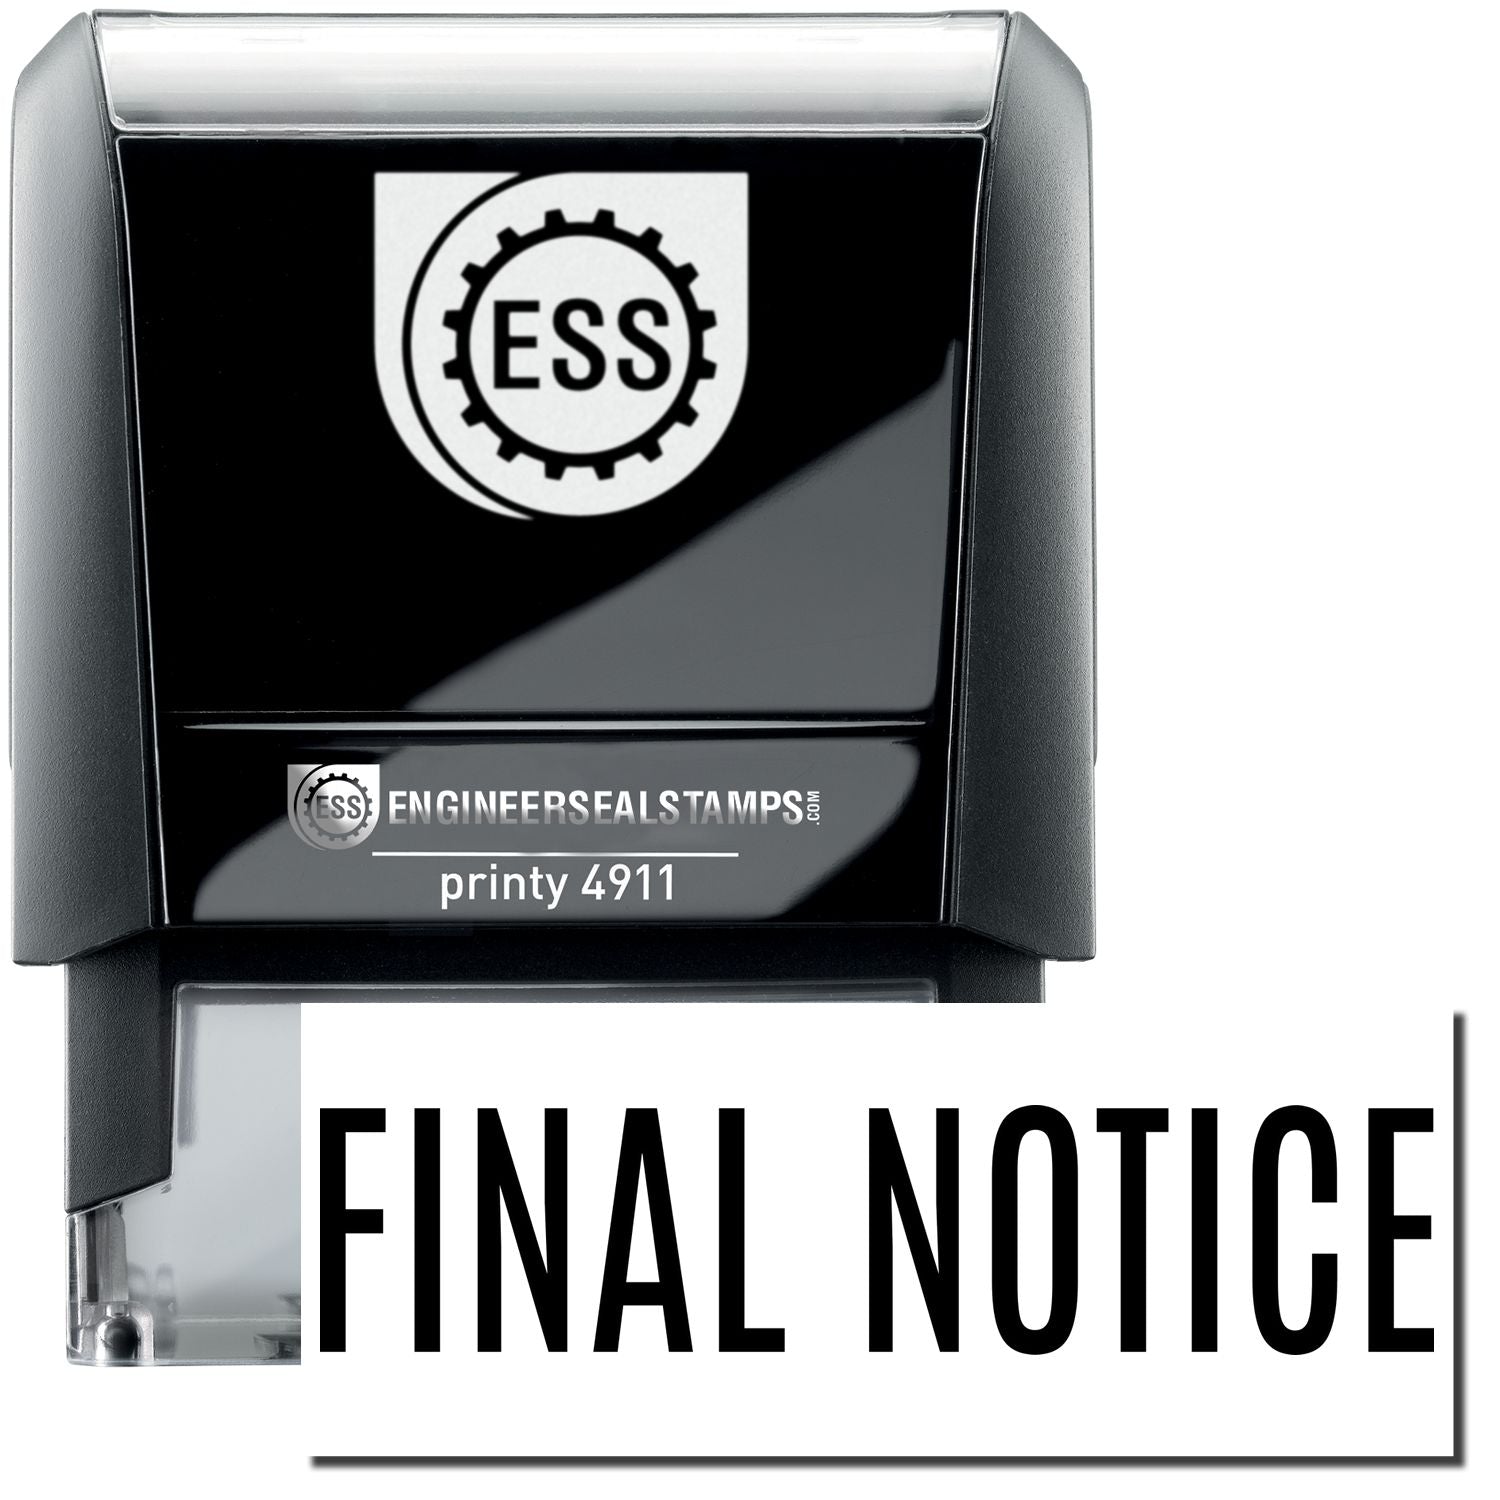 A self-inking stamp with a stamped image showing how the text "FINAL NOTICE" in a narrow font is displayed after stamping.